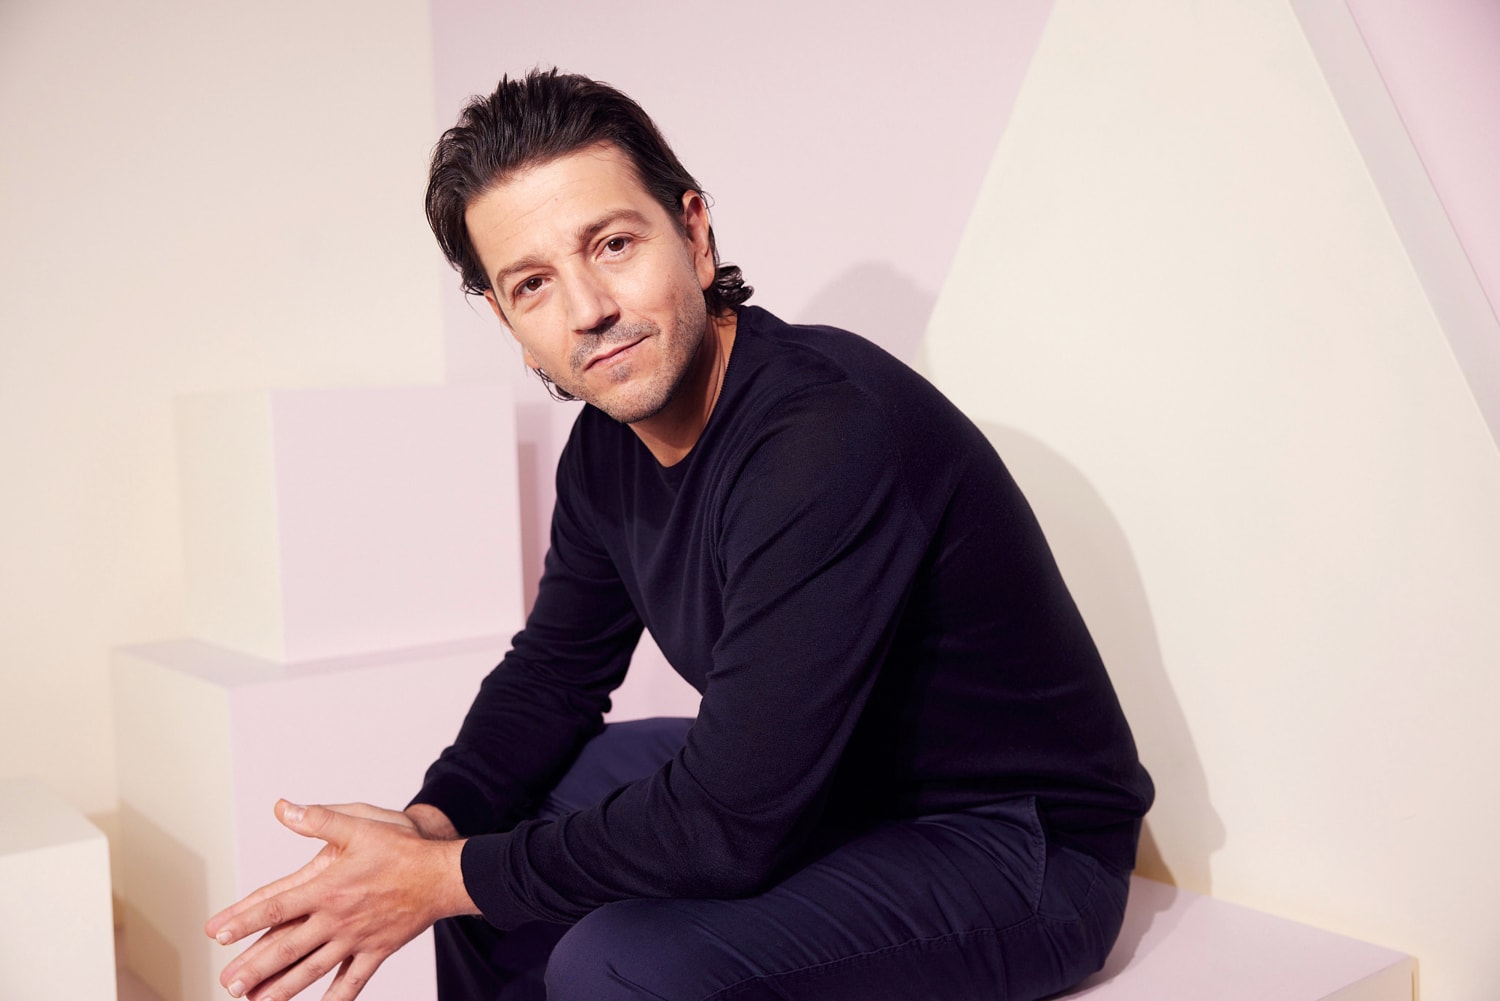 Star Wars: Andor' is 'supposed to be different,' says Diego Luna